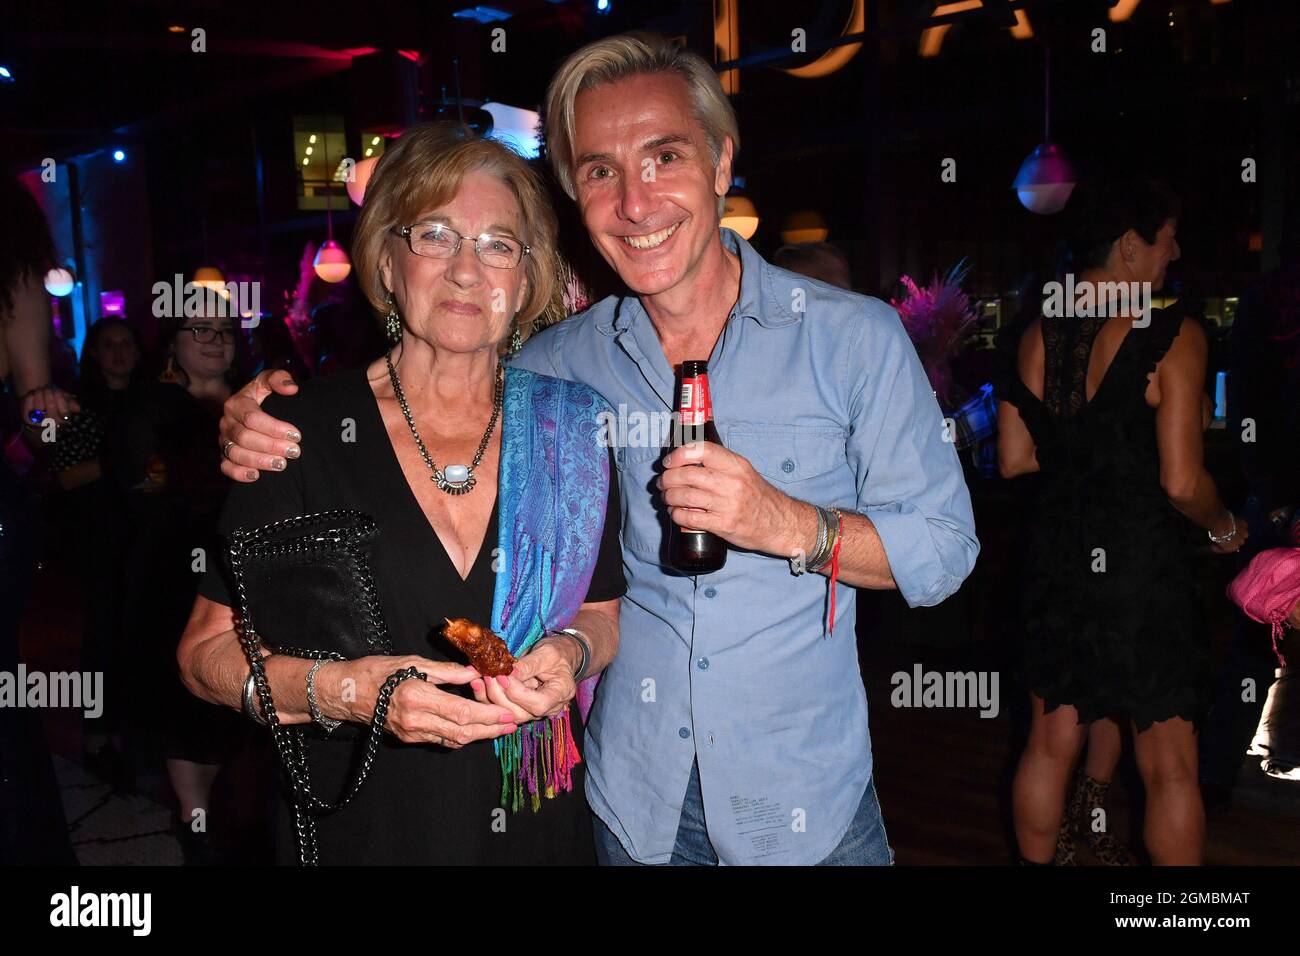 EDITORIAL USE ONLY Jonathan Butterell attends the after party at Furnace following the Sheffield premiere of Everybody's Talking About Jamie, the much-anticipated film adaptation of the award-winning West End hit musical. Issue date: Friday September 17, 2021. Stock Photo